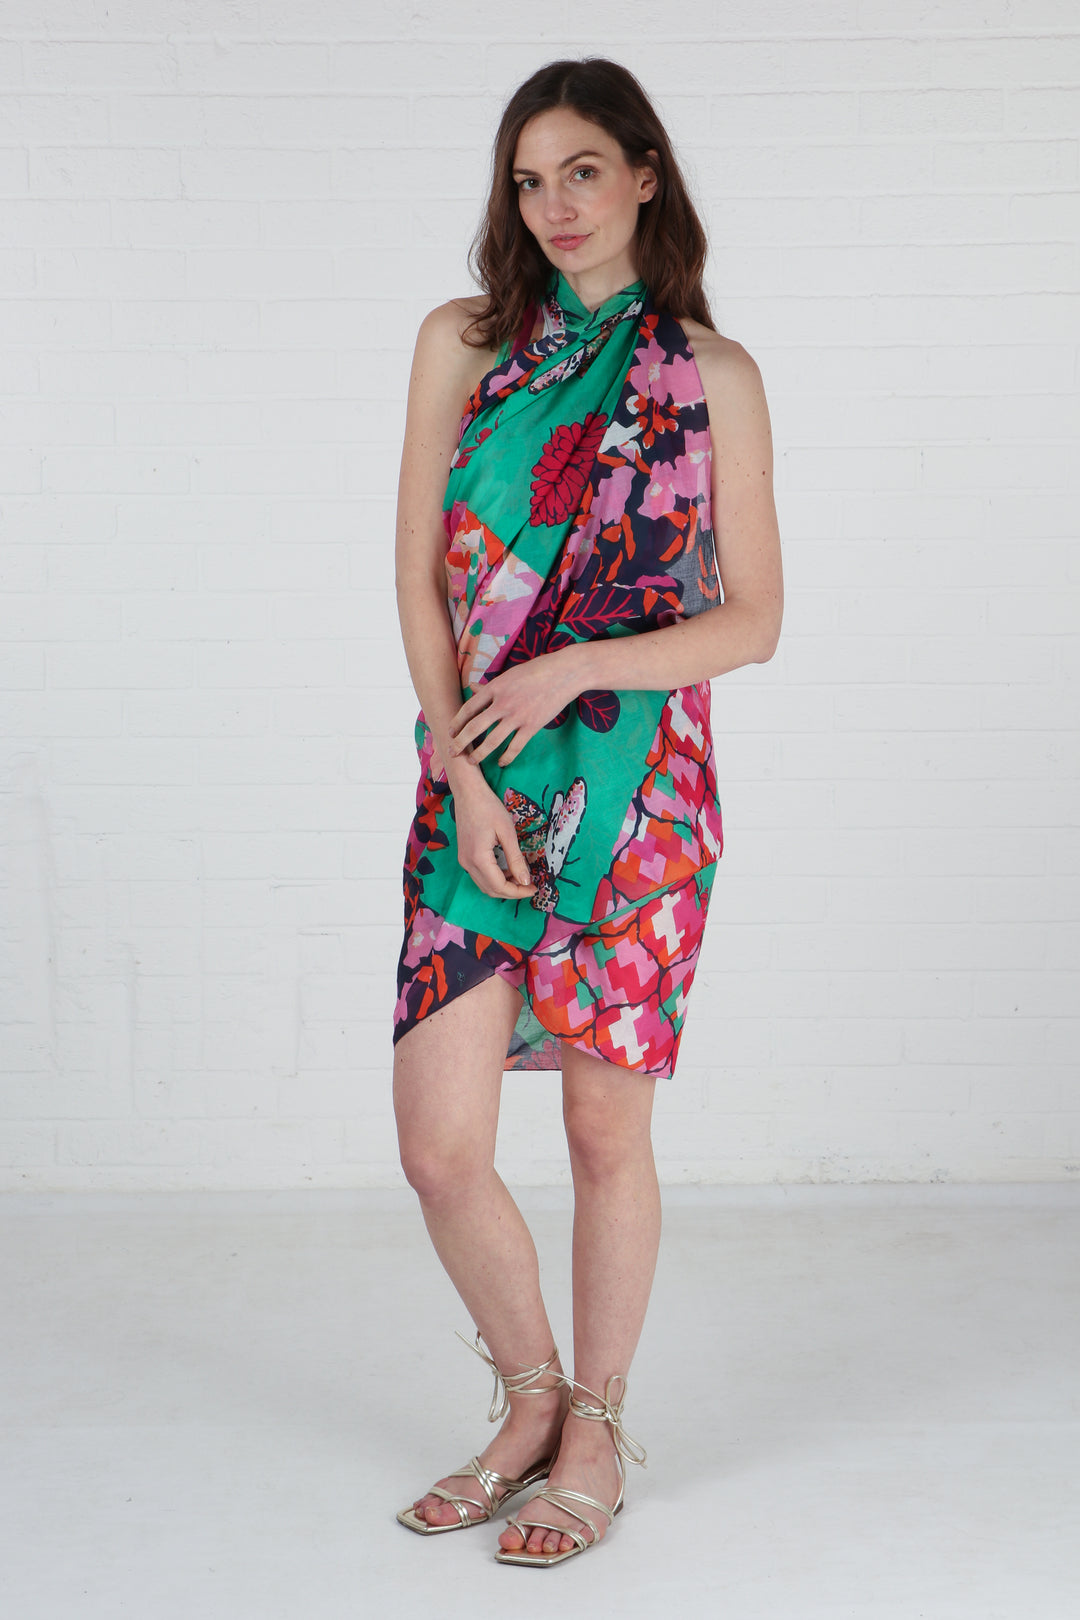 model wearing this cotton scarf as a beach cover up dress, showing the large bee print pattern and floral design